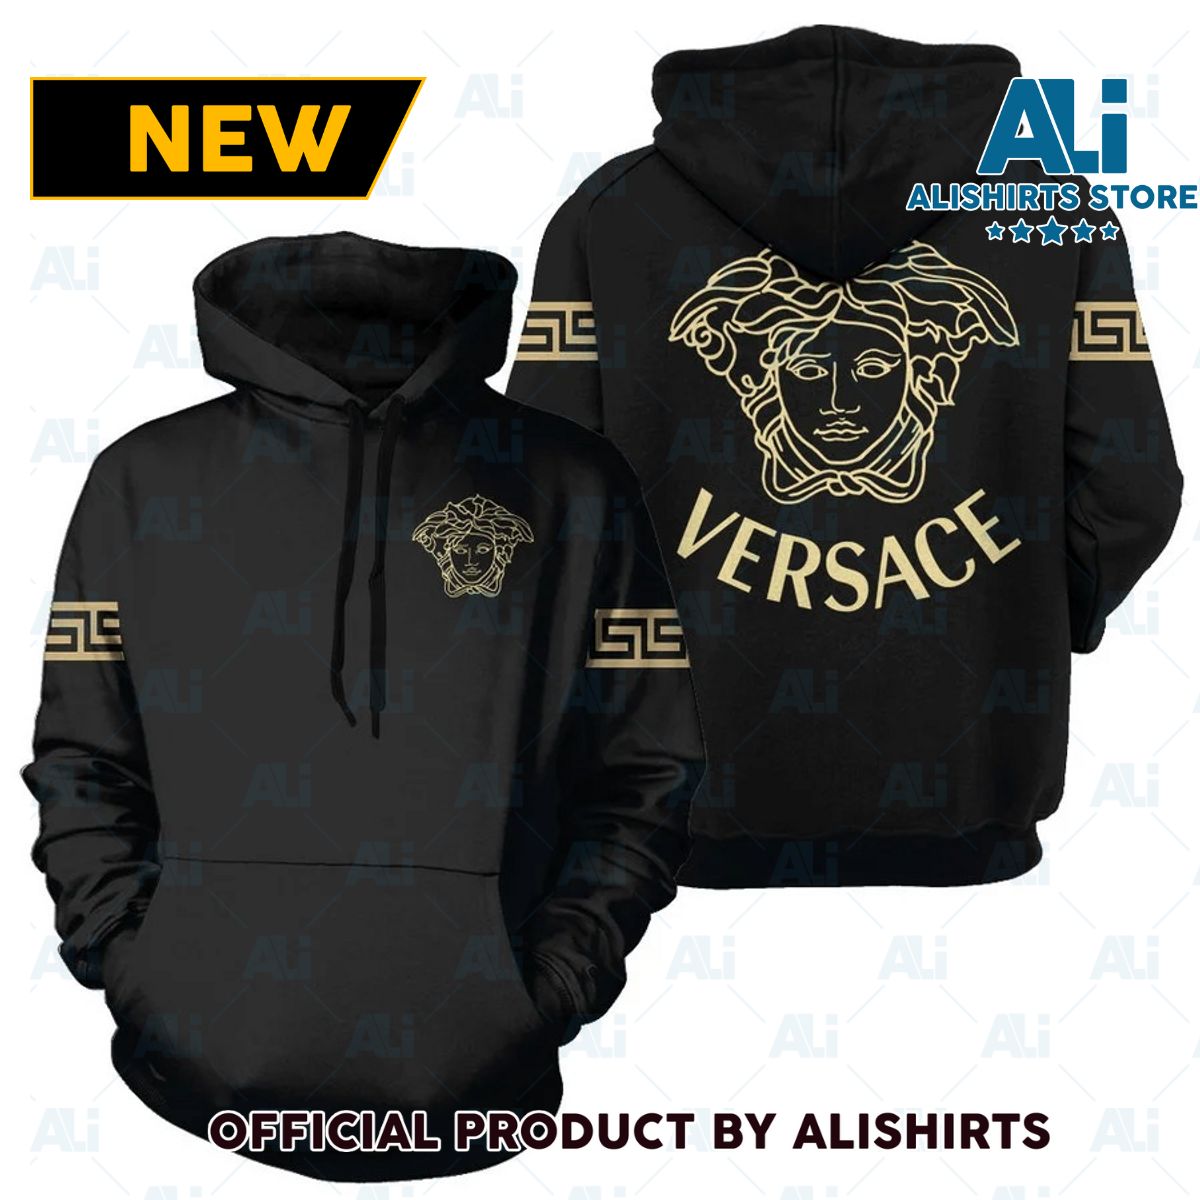 Gianni Versace Simplicify Hoodie Luxury Brand Outfits